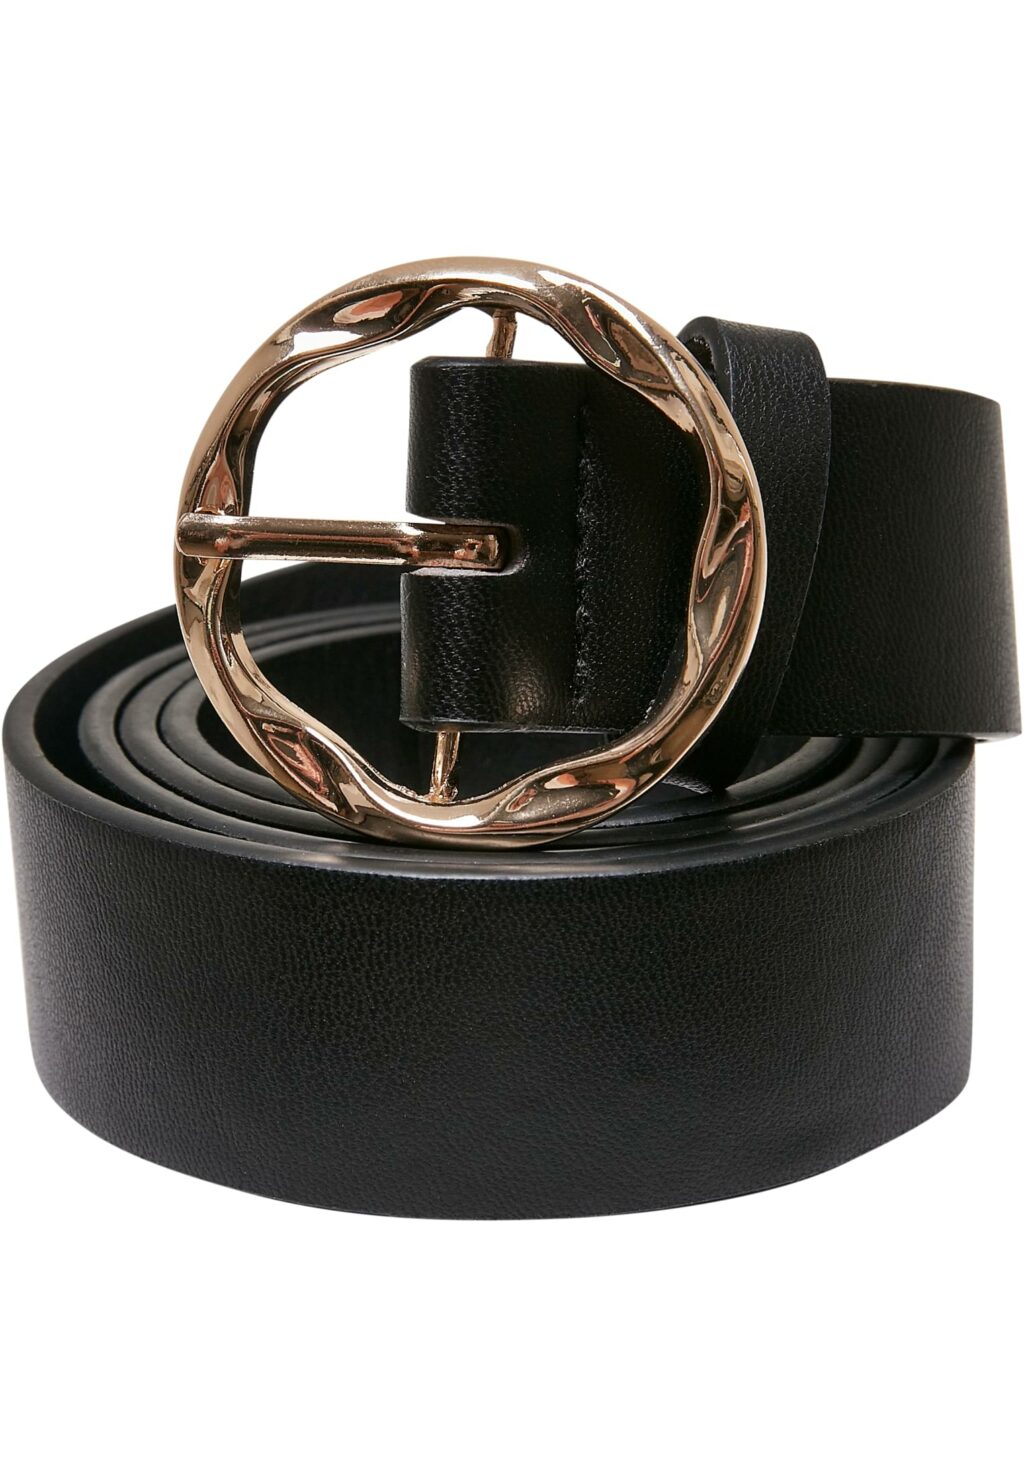 Small Synthetic Leather Ladies Belt black TB5820